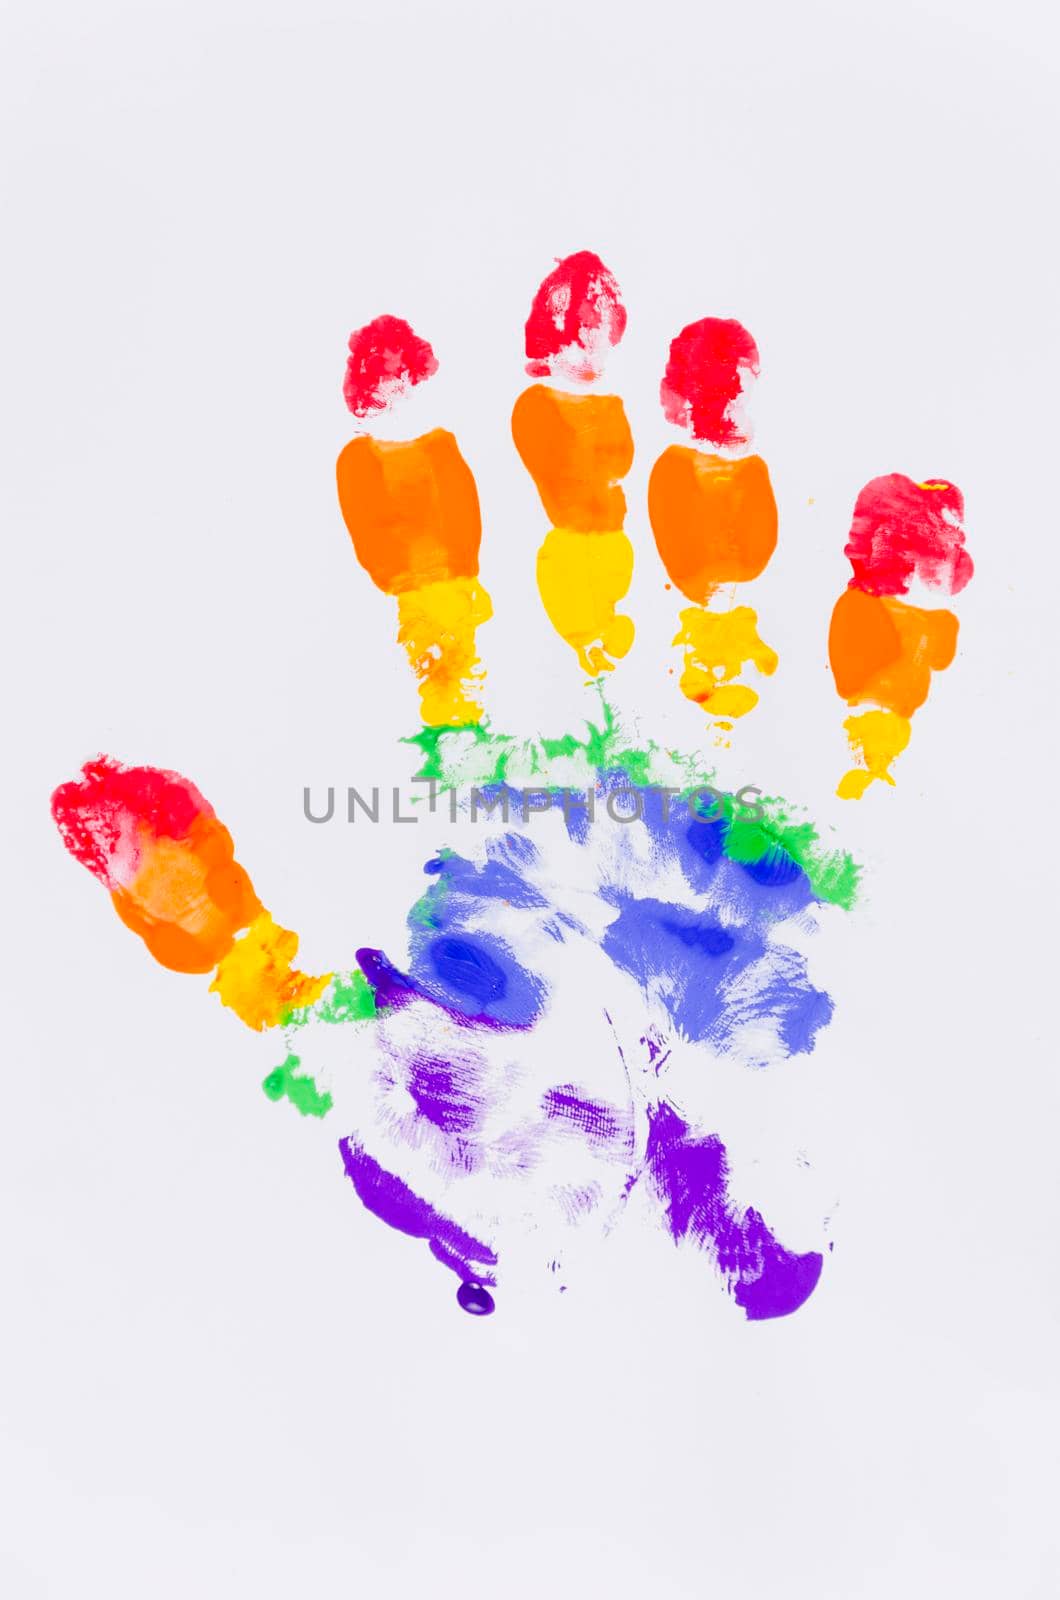 handprint with pride flag colors. High quality photo by Zahard